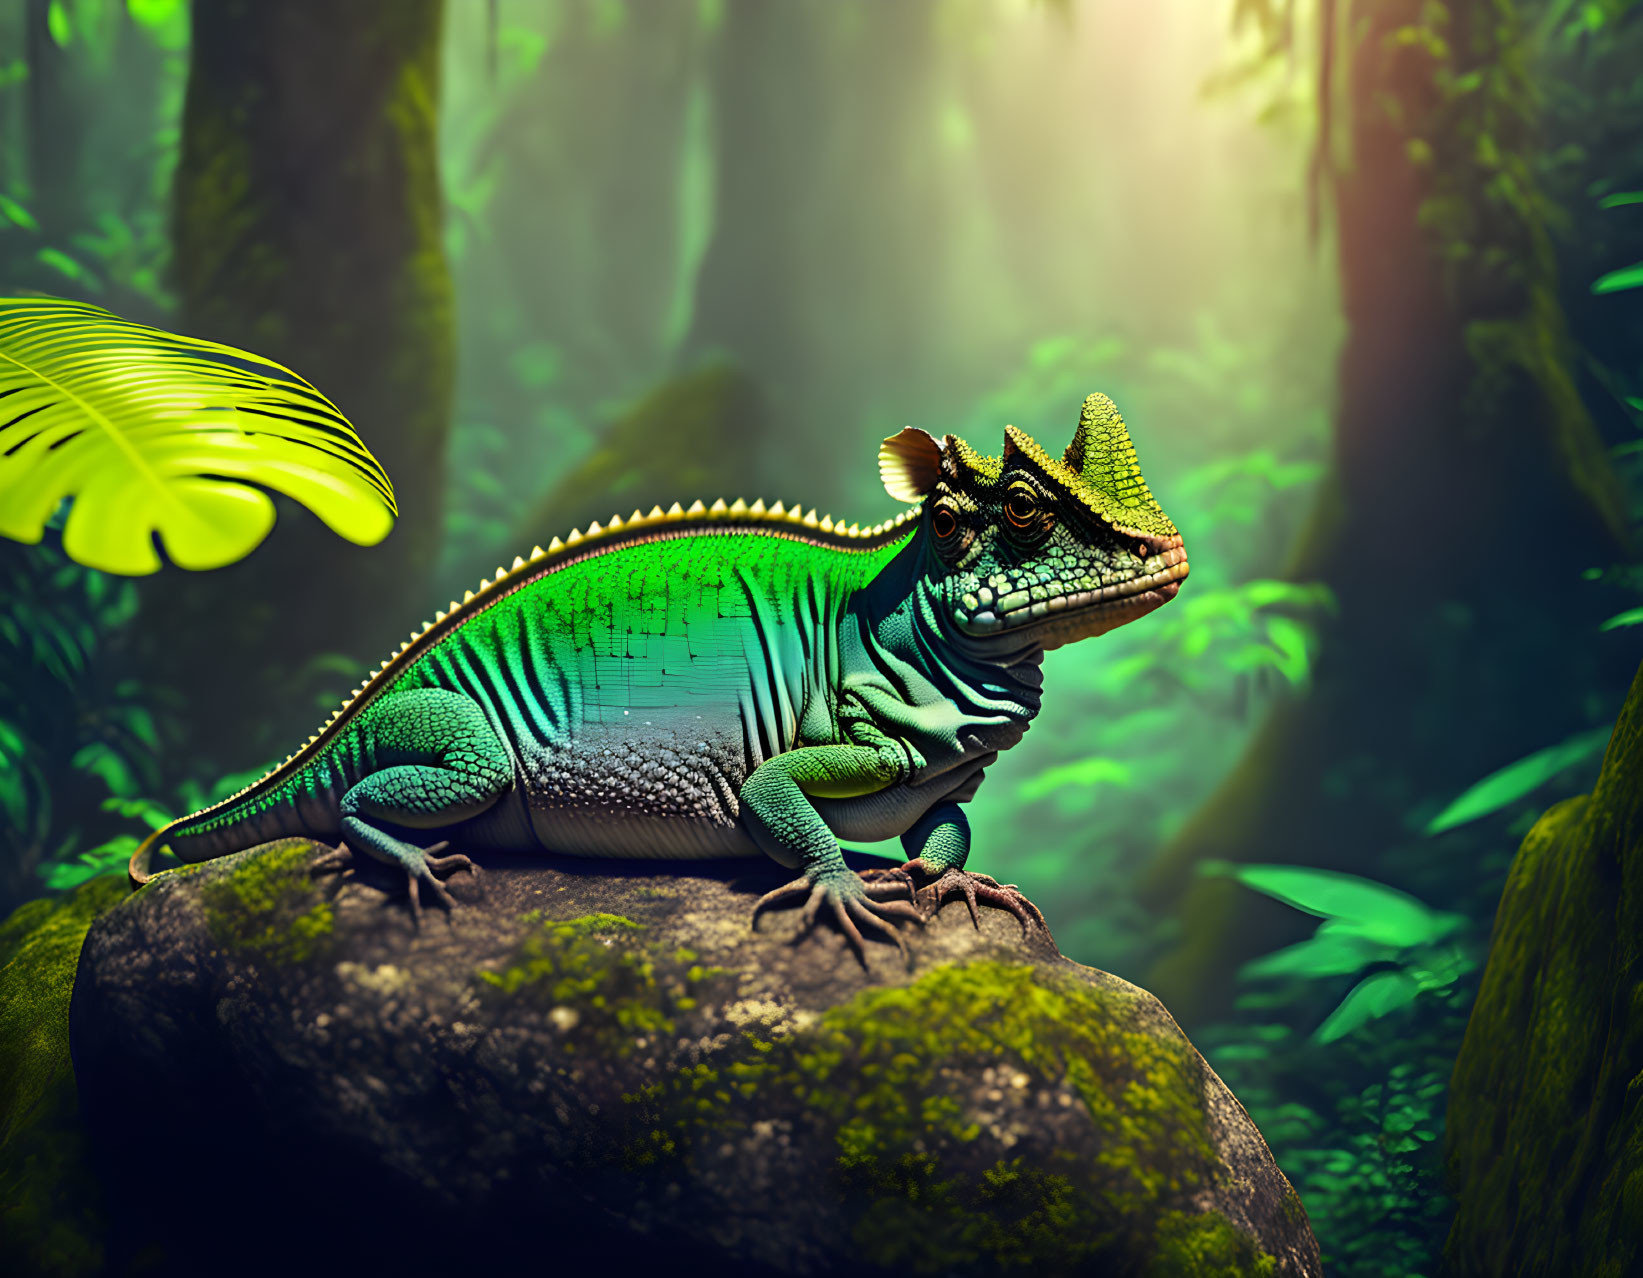 Colorful Chameleon with Spiky Ridge in Forest Scene